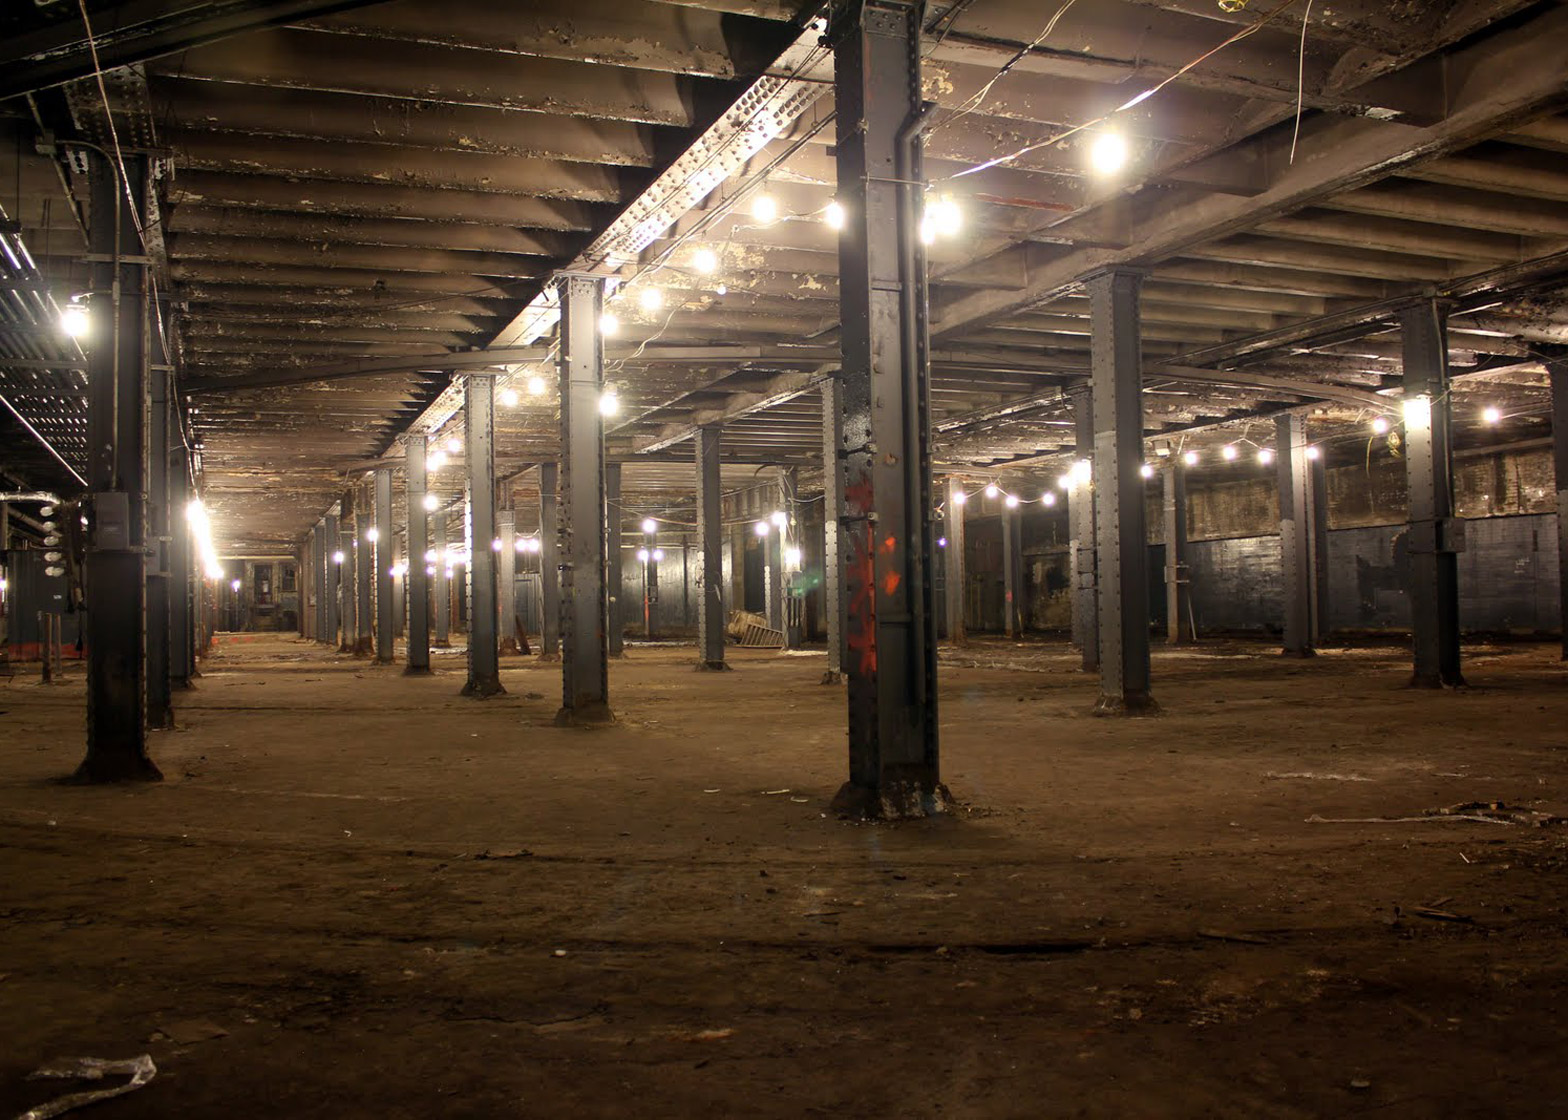 The Lowline will transform the Willamsburg trolley terminal, which has been abandoned since 1948